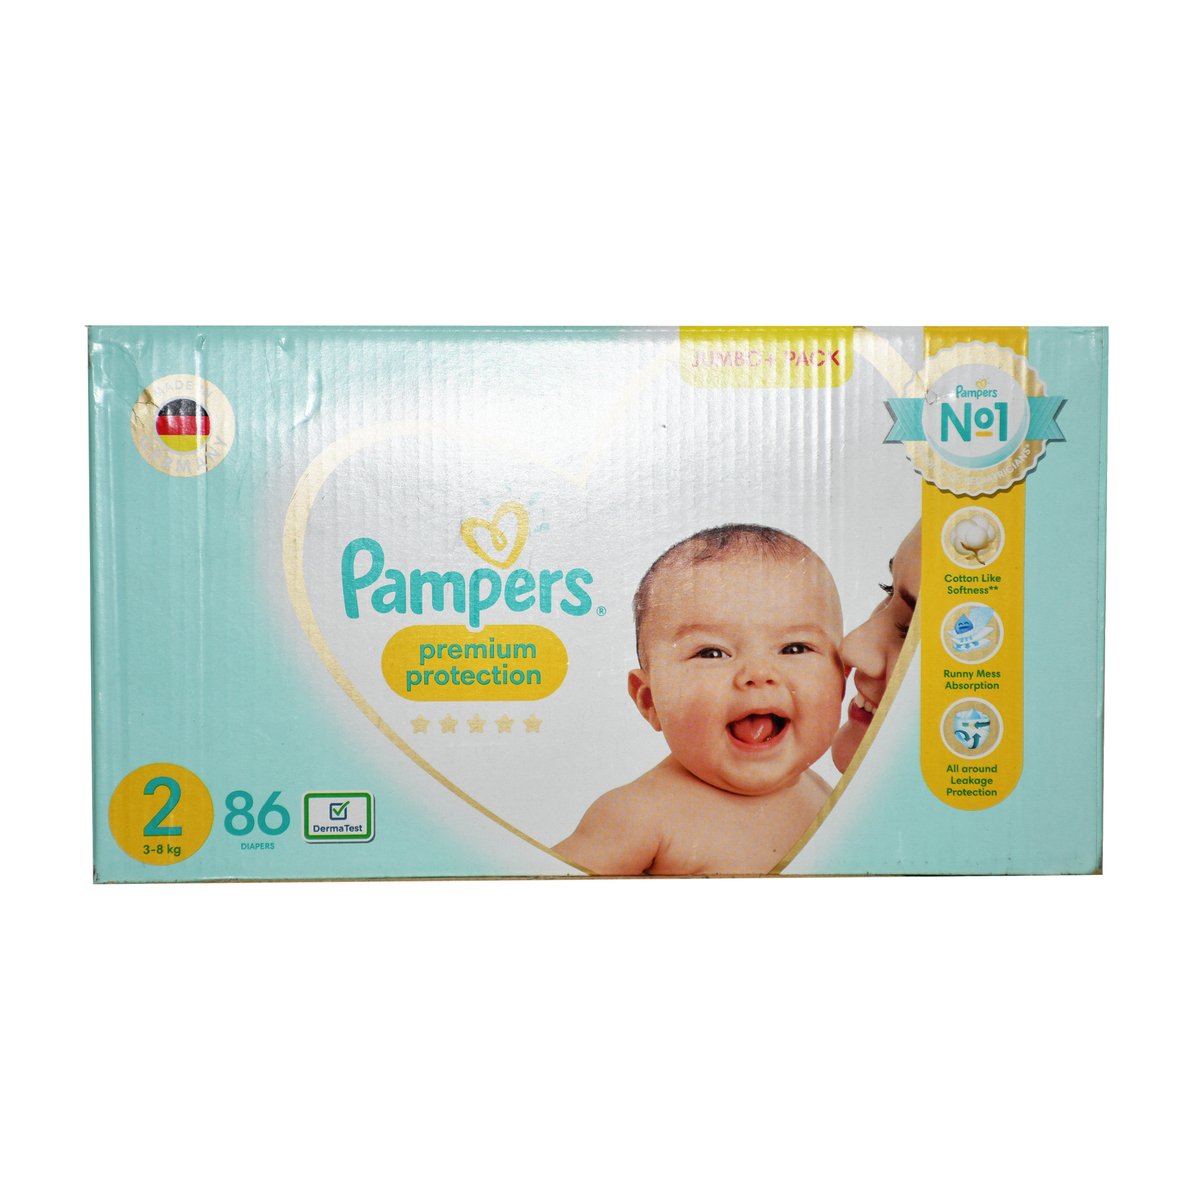 Diapers | | Pampers Dry Best 4-8kg Price 2, Baby Delivery Box Express at Kuwait Lulu Care Online 86pcs New Size Premium